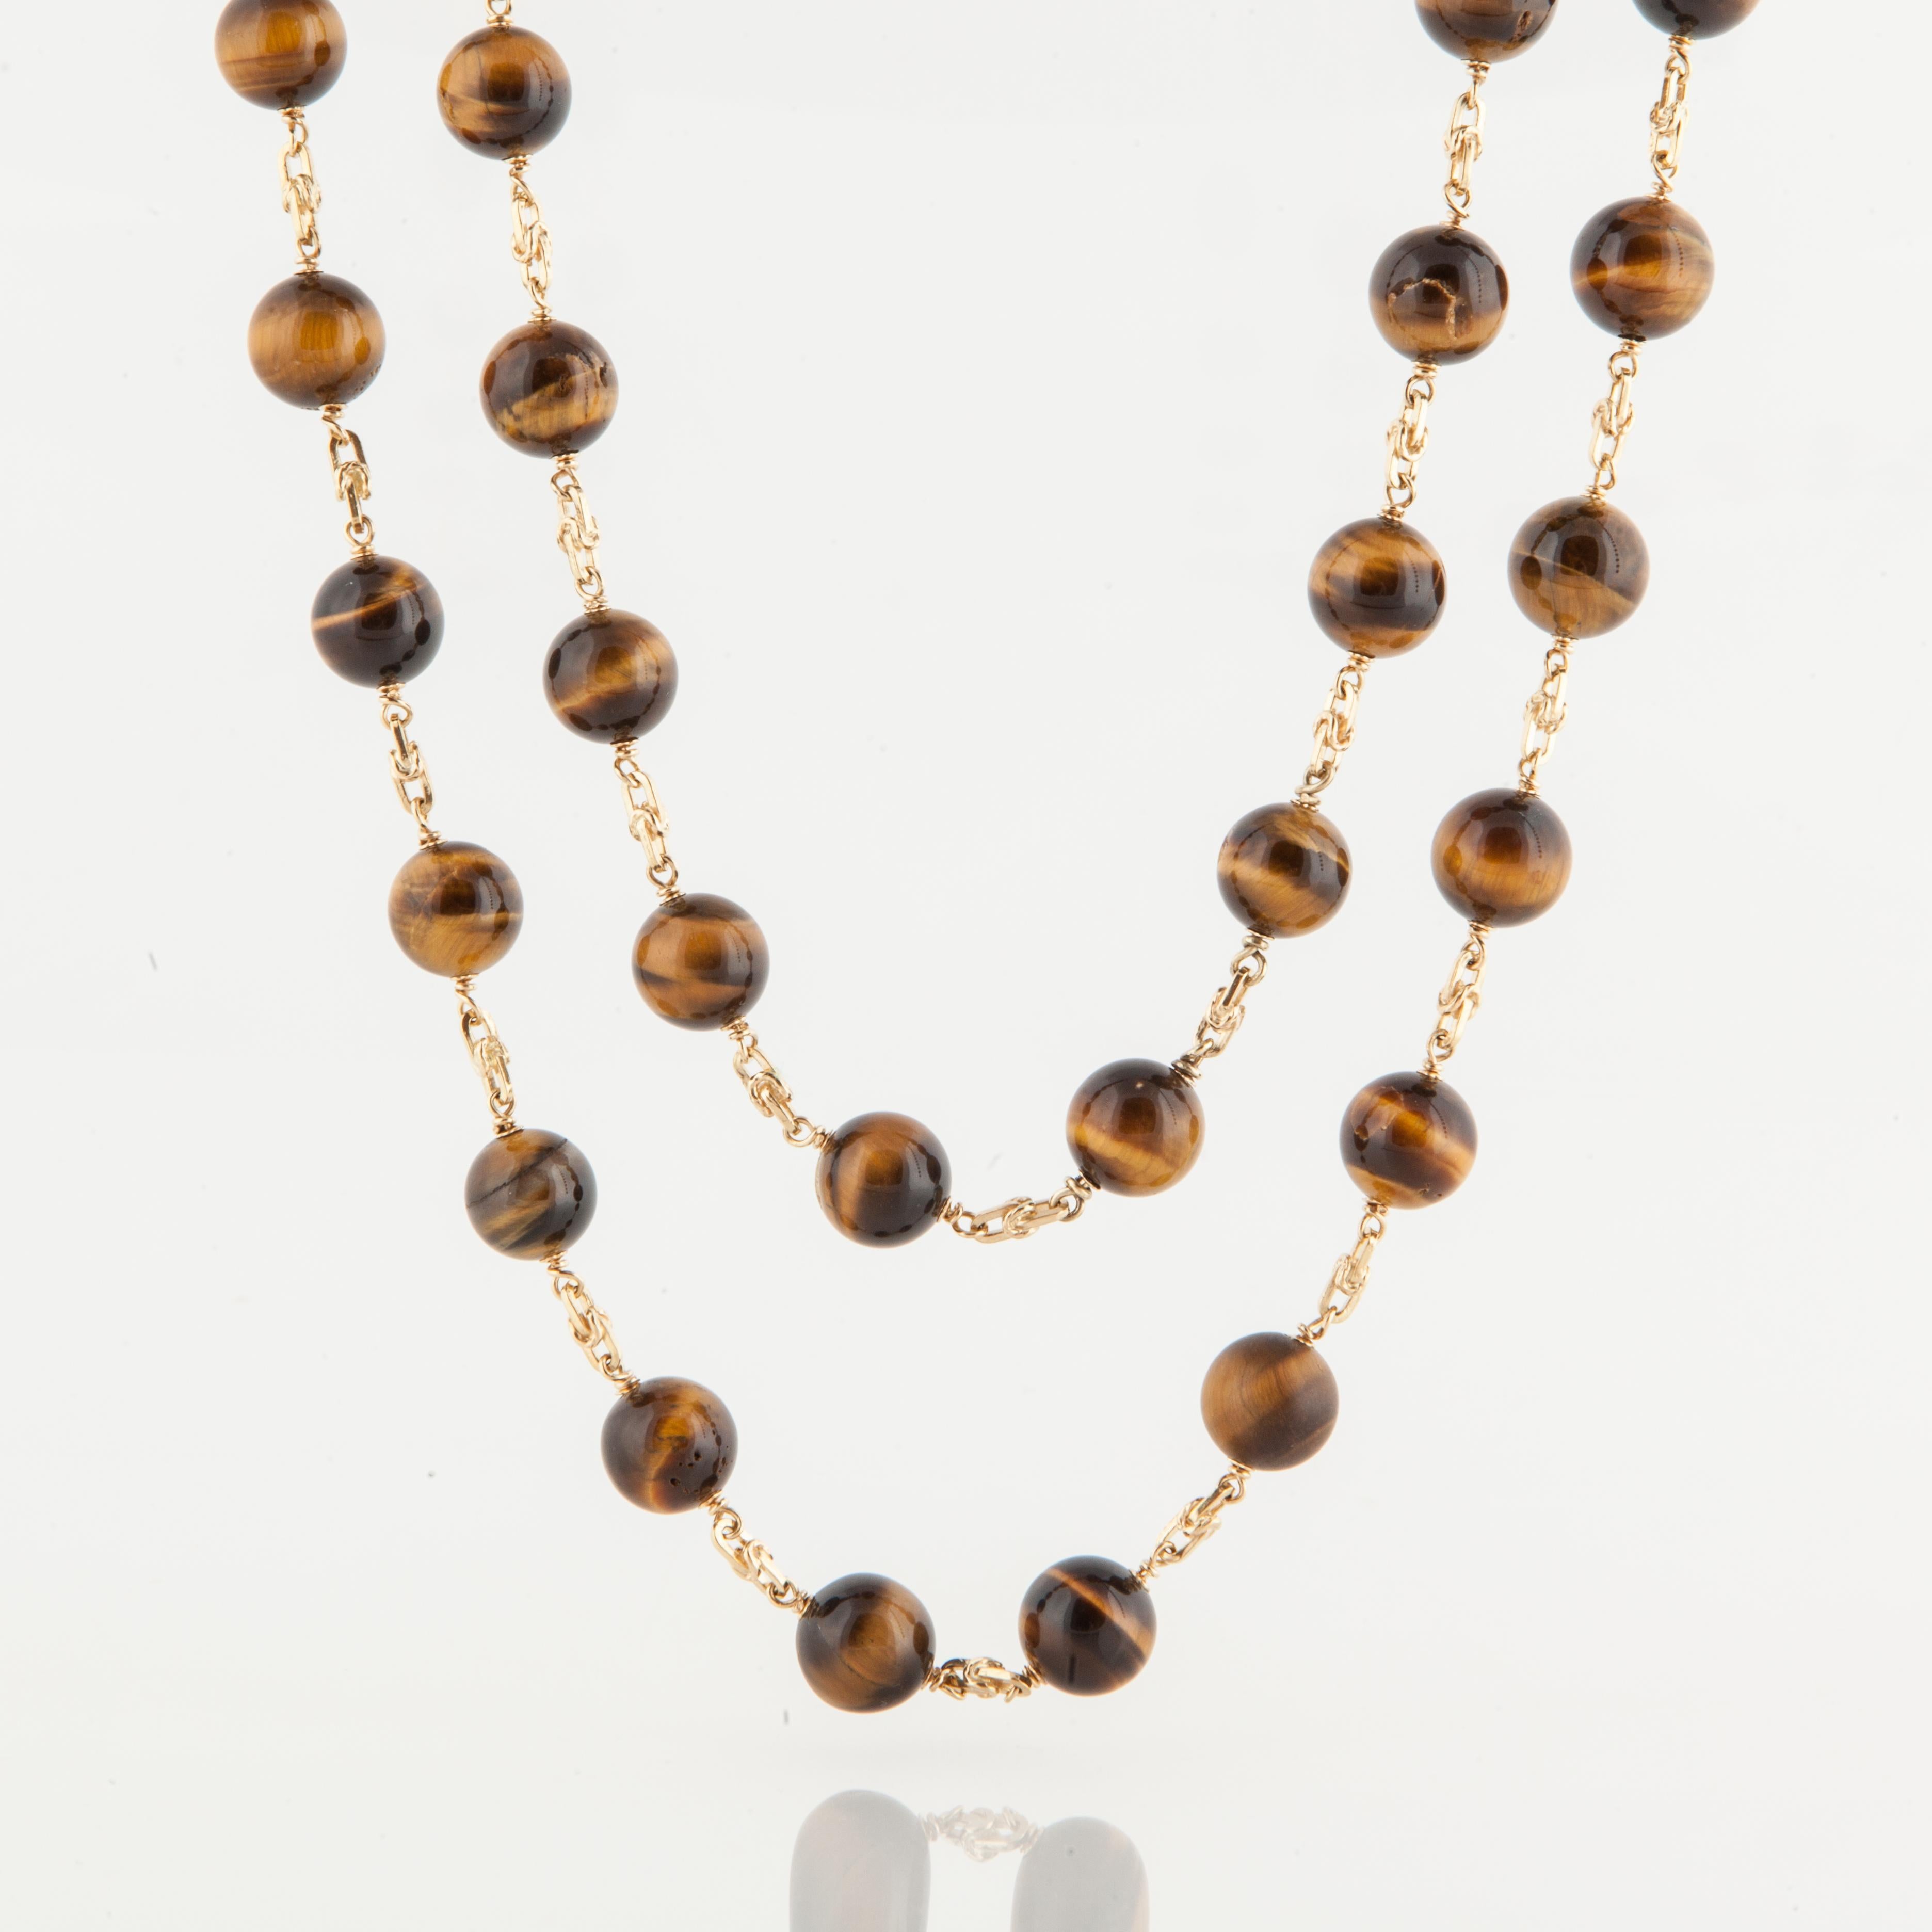 Tiger's Eye bead and chain necklace composed of 111 beads that are slightly graduated and 18K yellow gold.  The beads are measure 9.6mm - 15mm.  The necklace measures 102 1/2 inches long.  